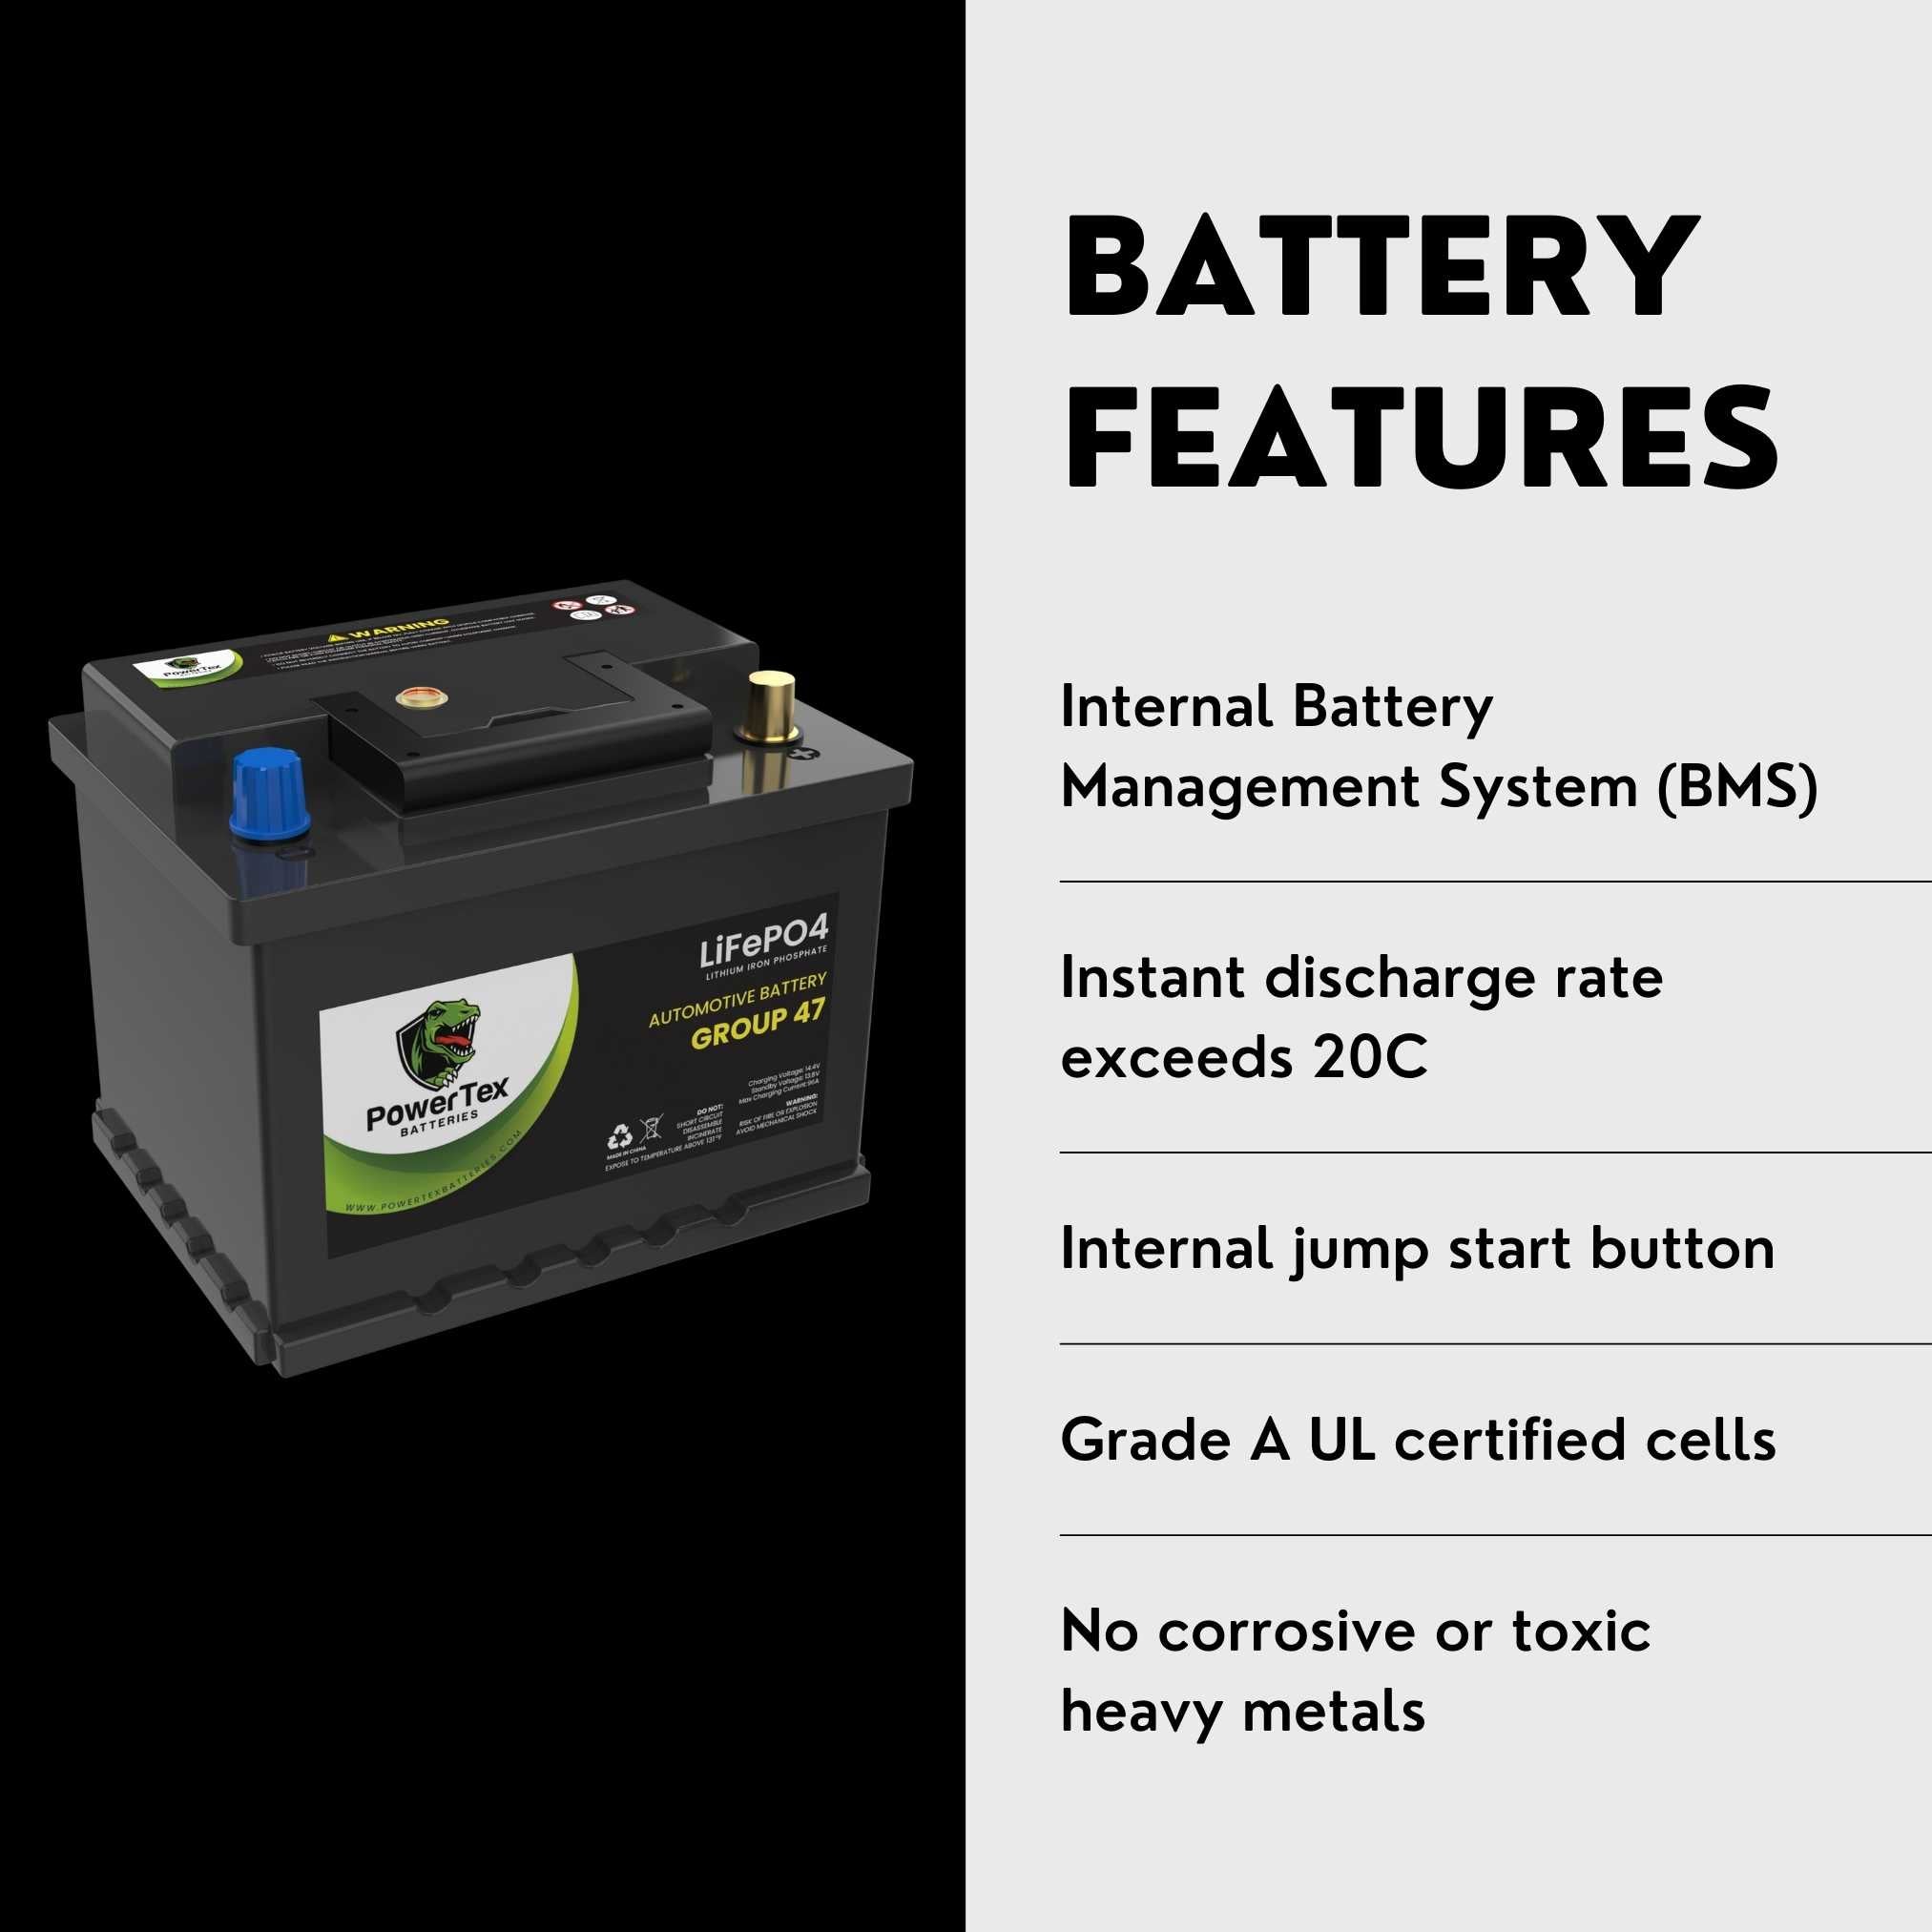 2009 Volkswagen Golf City Car Battery BCI Group 47 H5 Lithium LiFePO4 Automotive Battery